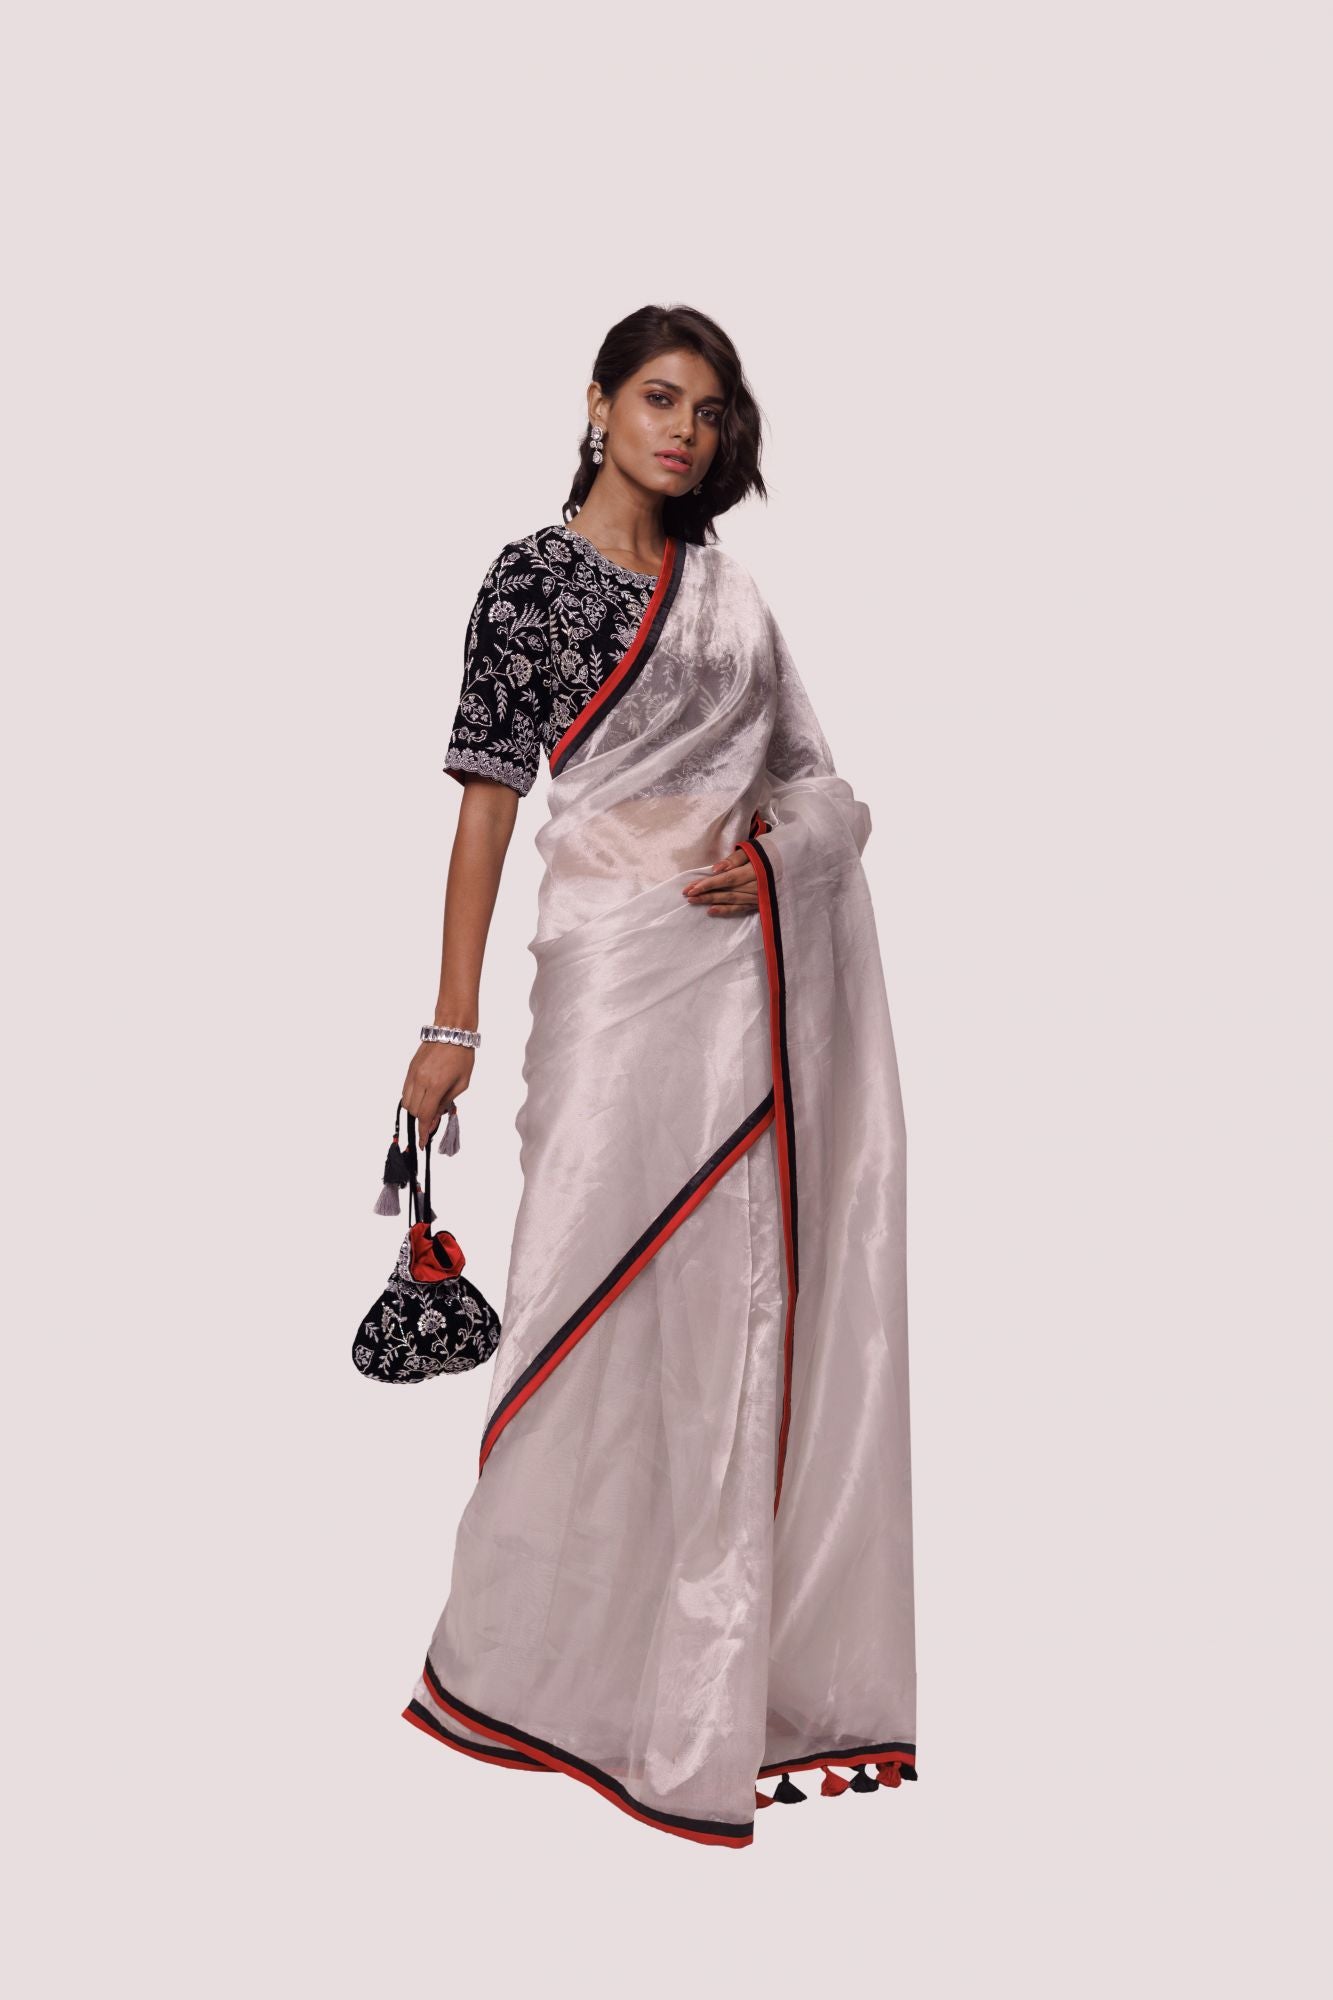 Buy silver tissue saree online in USA with black embroidered saree blouse. Look your best at parties and weddings in beautiful designer sarees, embroidered sarees, handwoven sarees, silk sarees, organza saris from Pure Elegance Indian saree store in USA.-saree